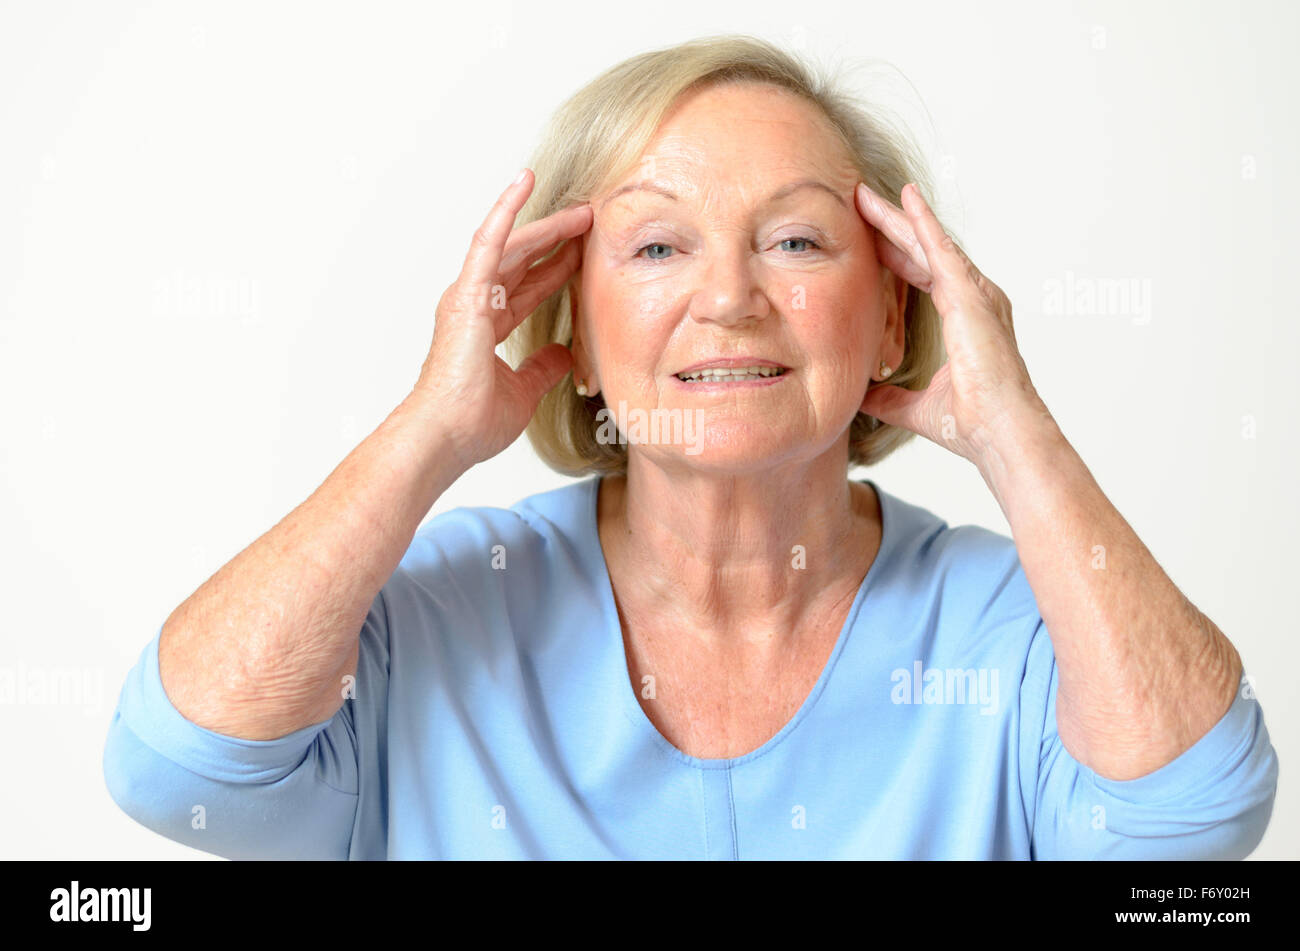 Senior woman wearing blue shirt while showing her face, effect of aging caused by loss of elasticity, close-up Stock Photo